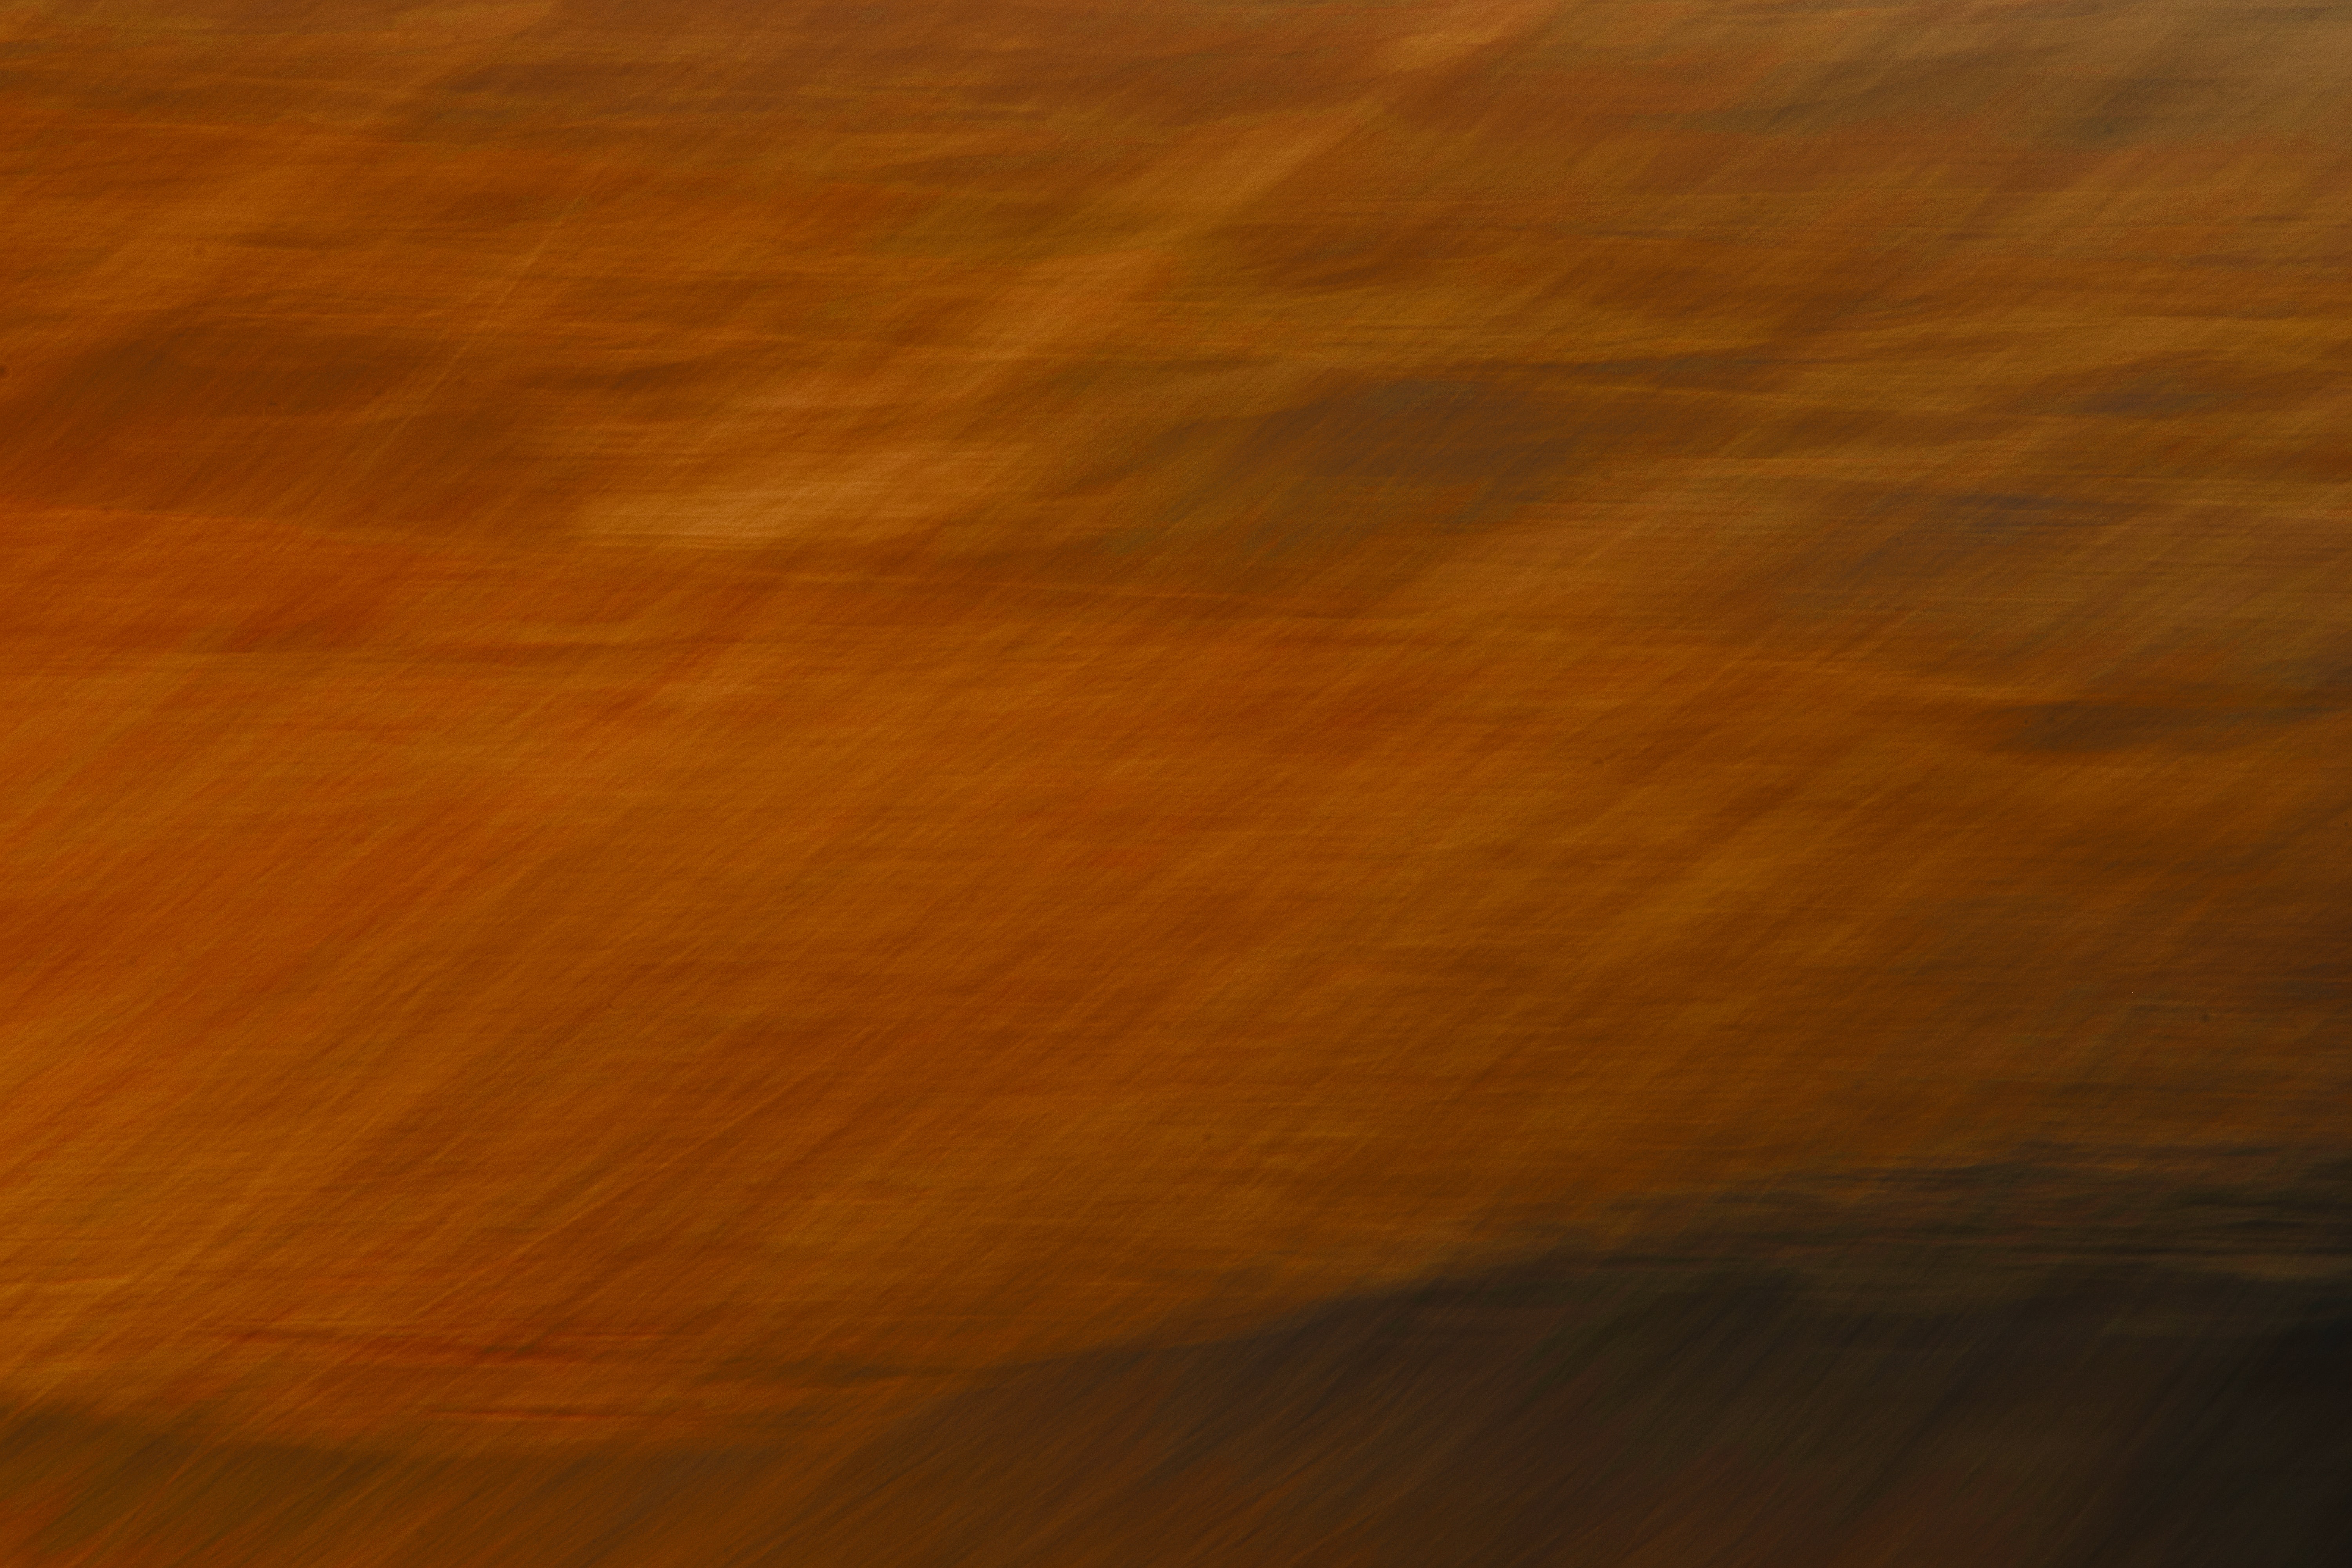 brown, blur, background, abstract, smooth High Definition image